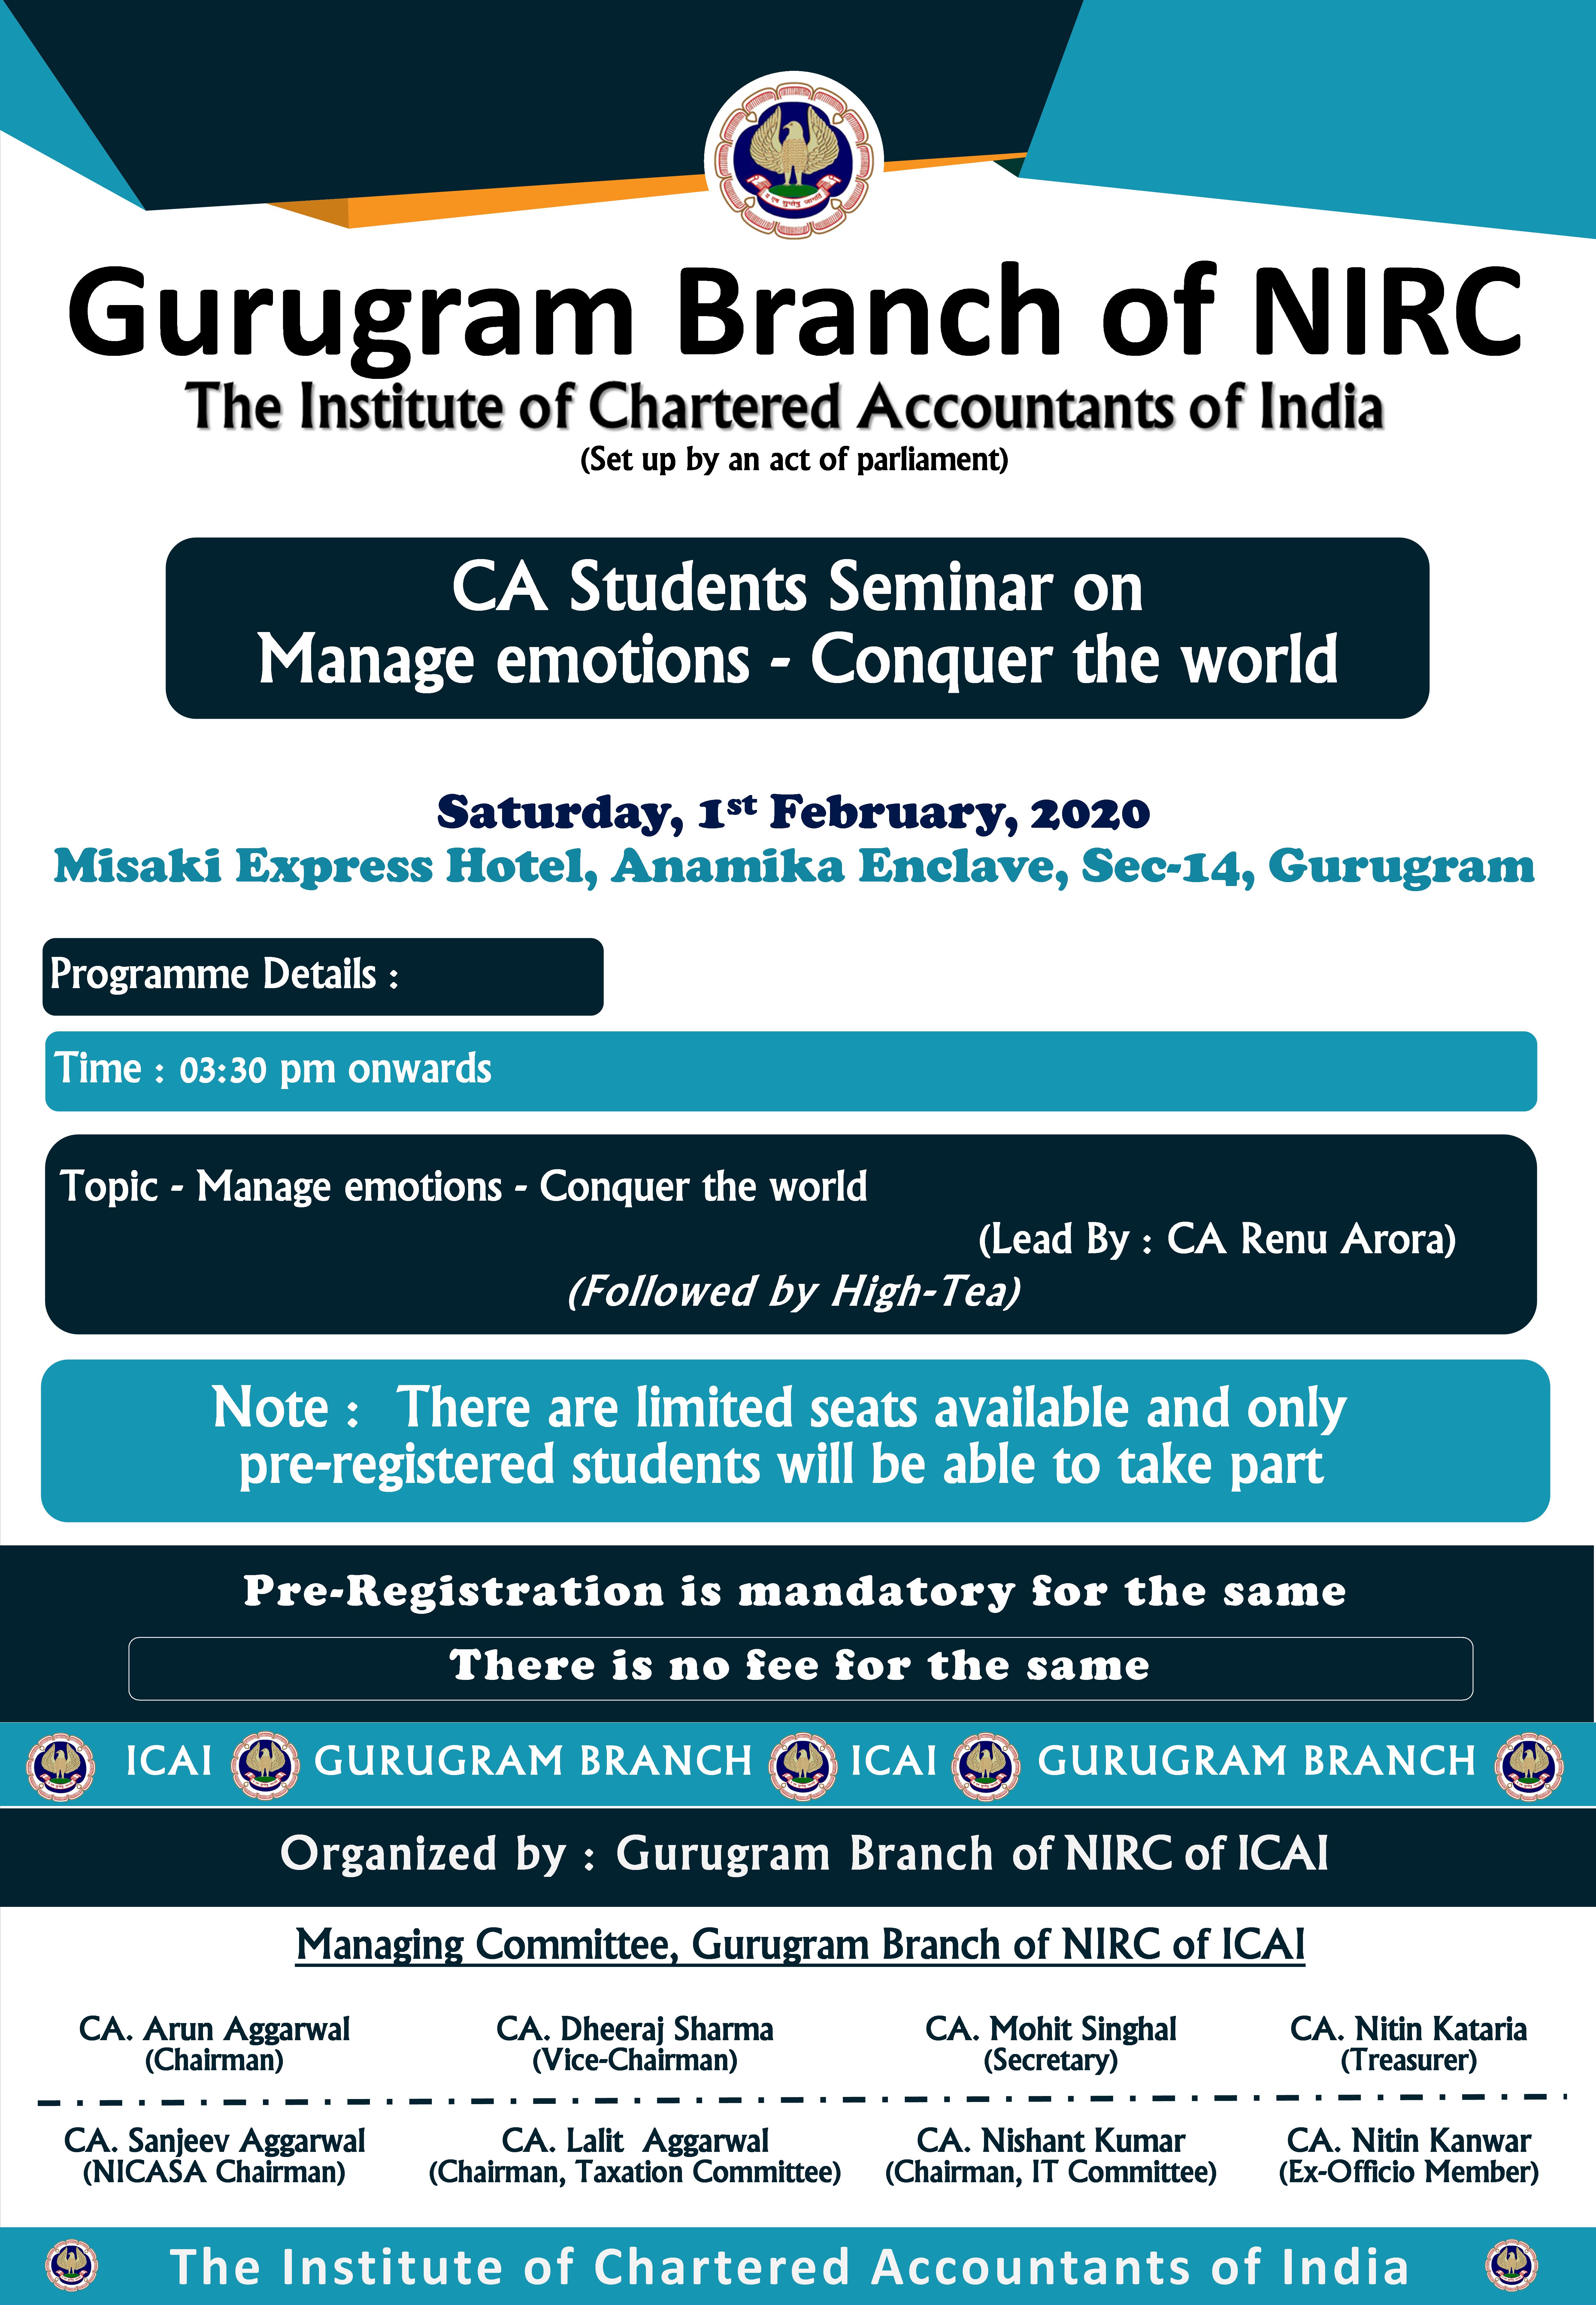 CA Students Seminar on managing emotions in tough time Manage emotions - Conquer the world